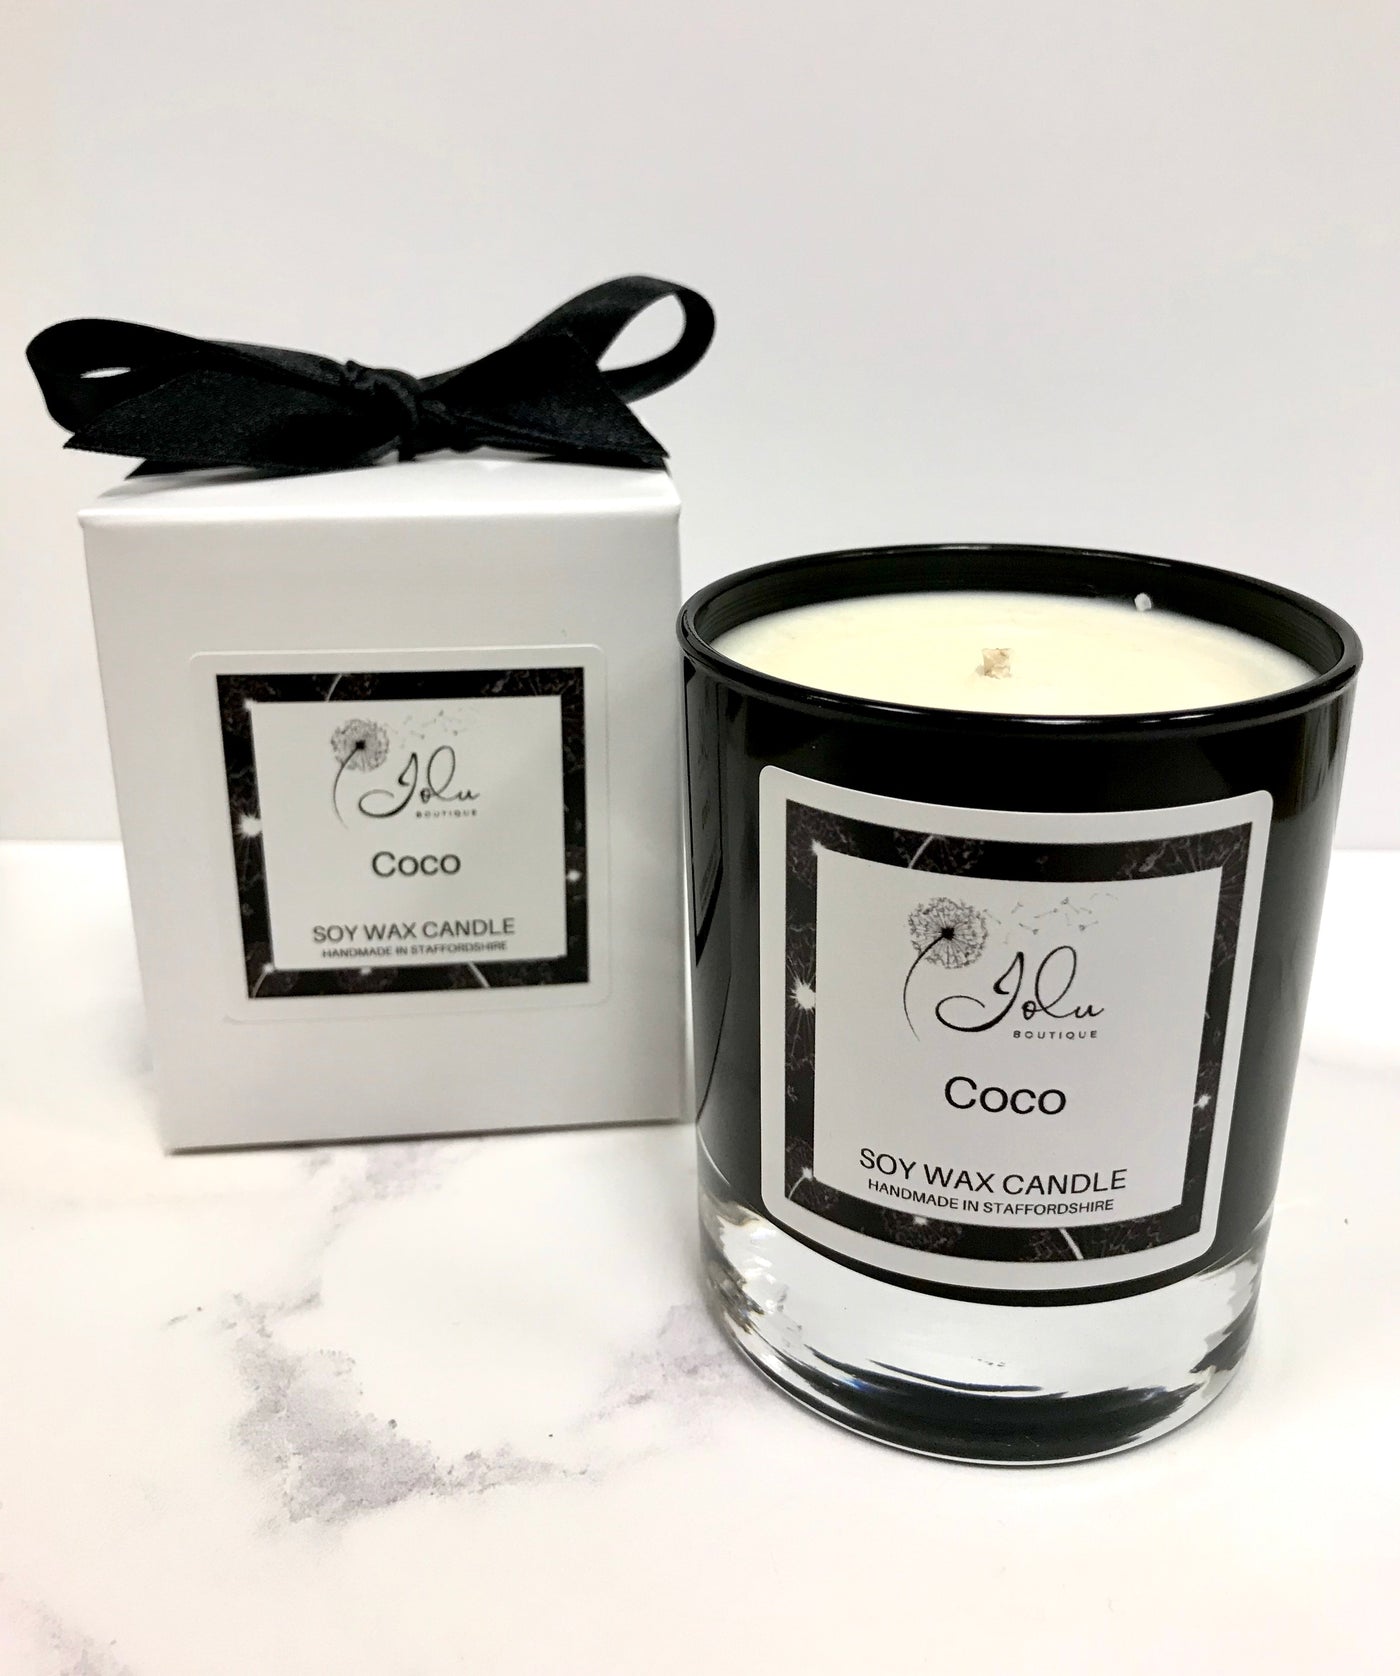 Jolu Boutique Coco Soy Wax Candle